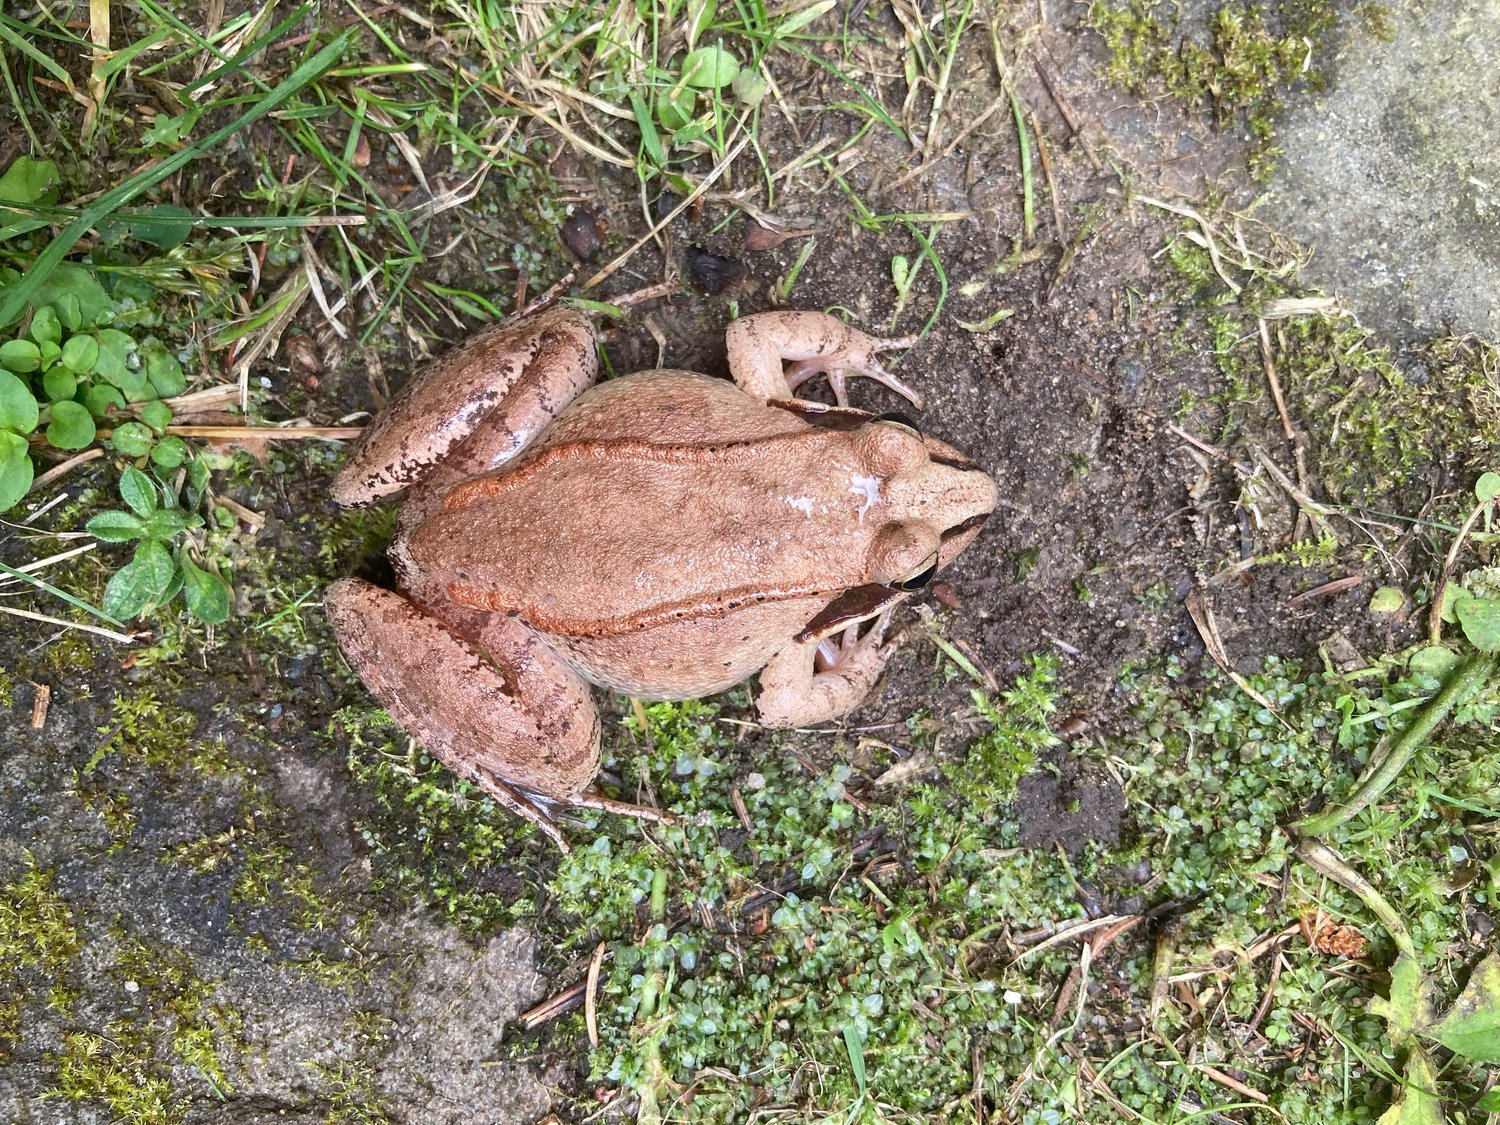 The dorsolateral ridges of the wood frog (skin folds extending along the upper sides of the frog’s body), help to identify this species.